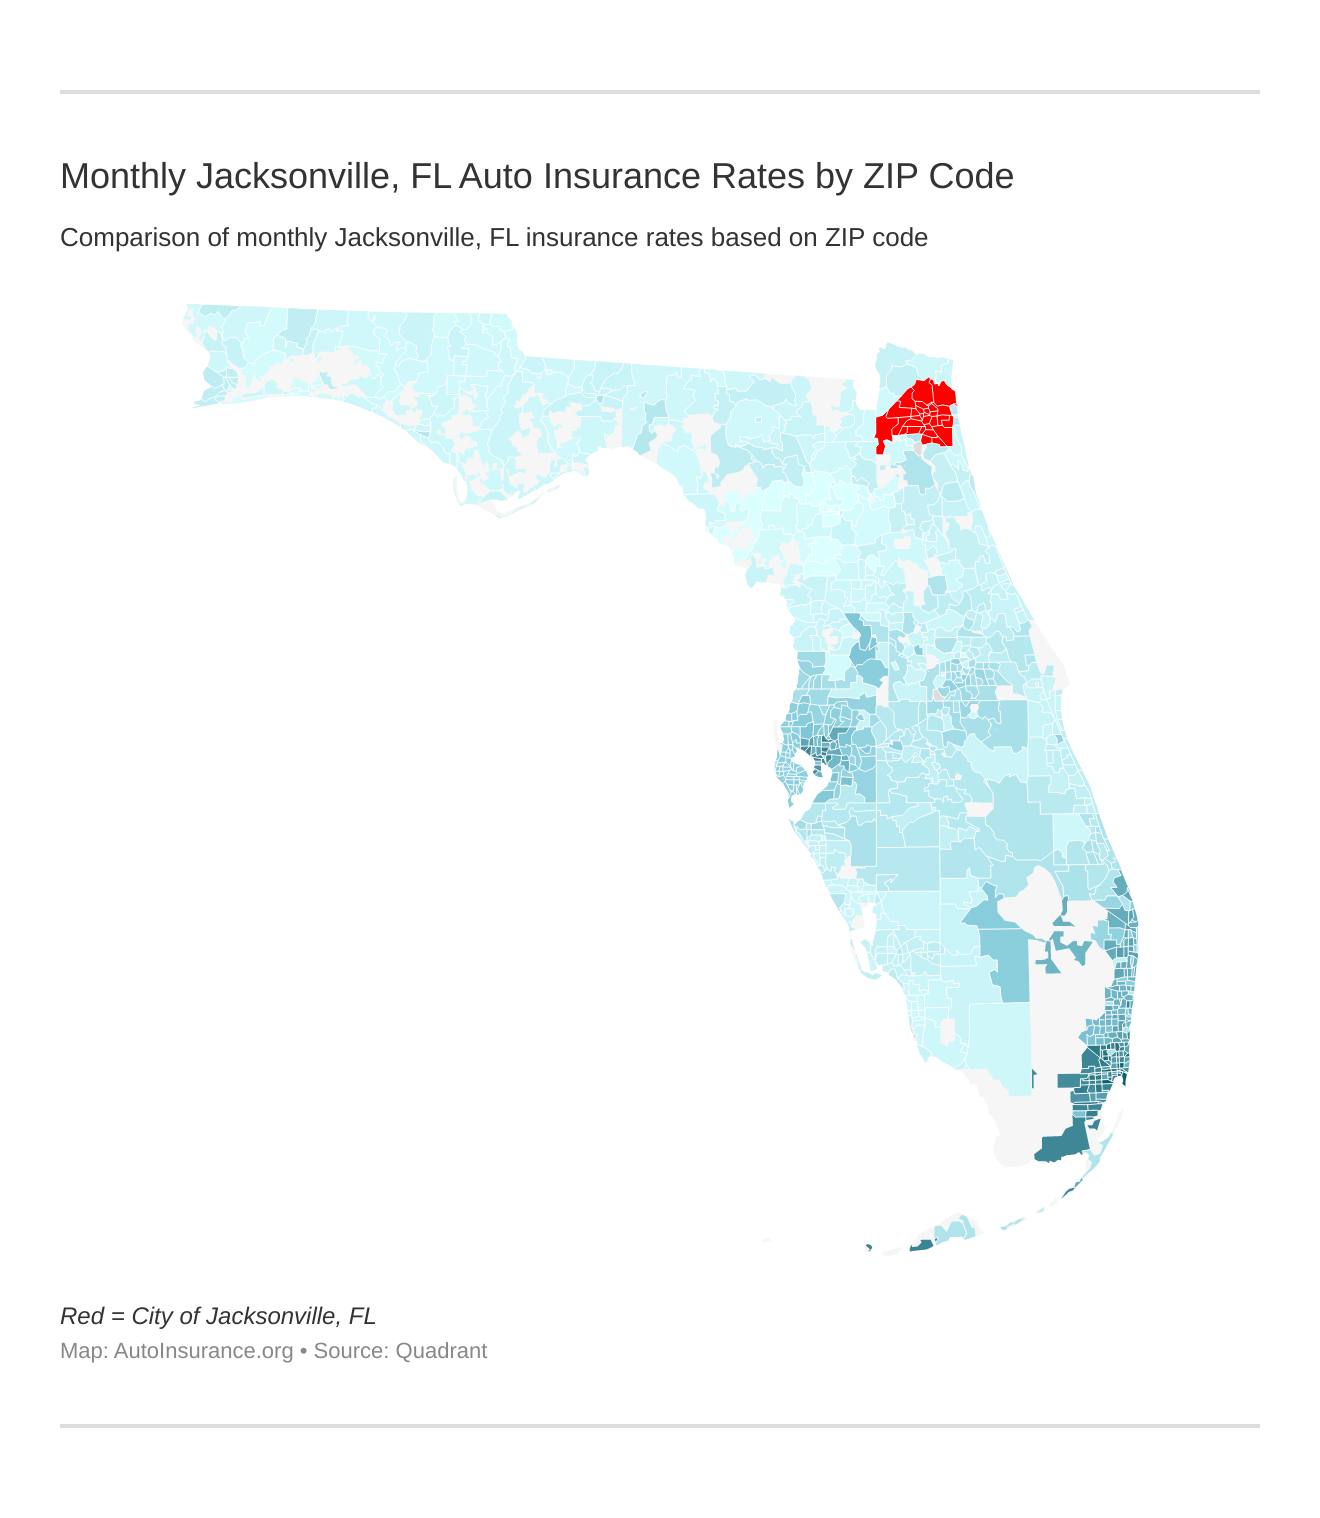 Monthly Jacksonville, FL Auto Insurance Rates by ZIP Code